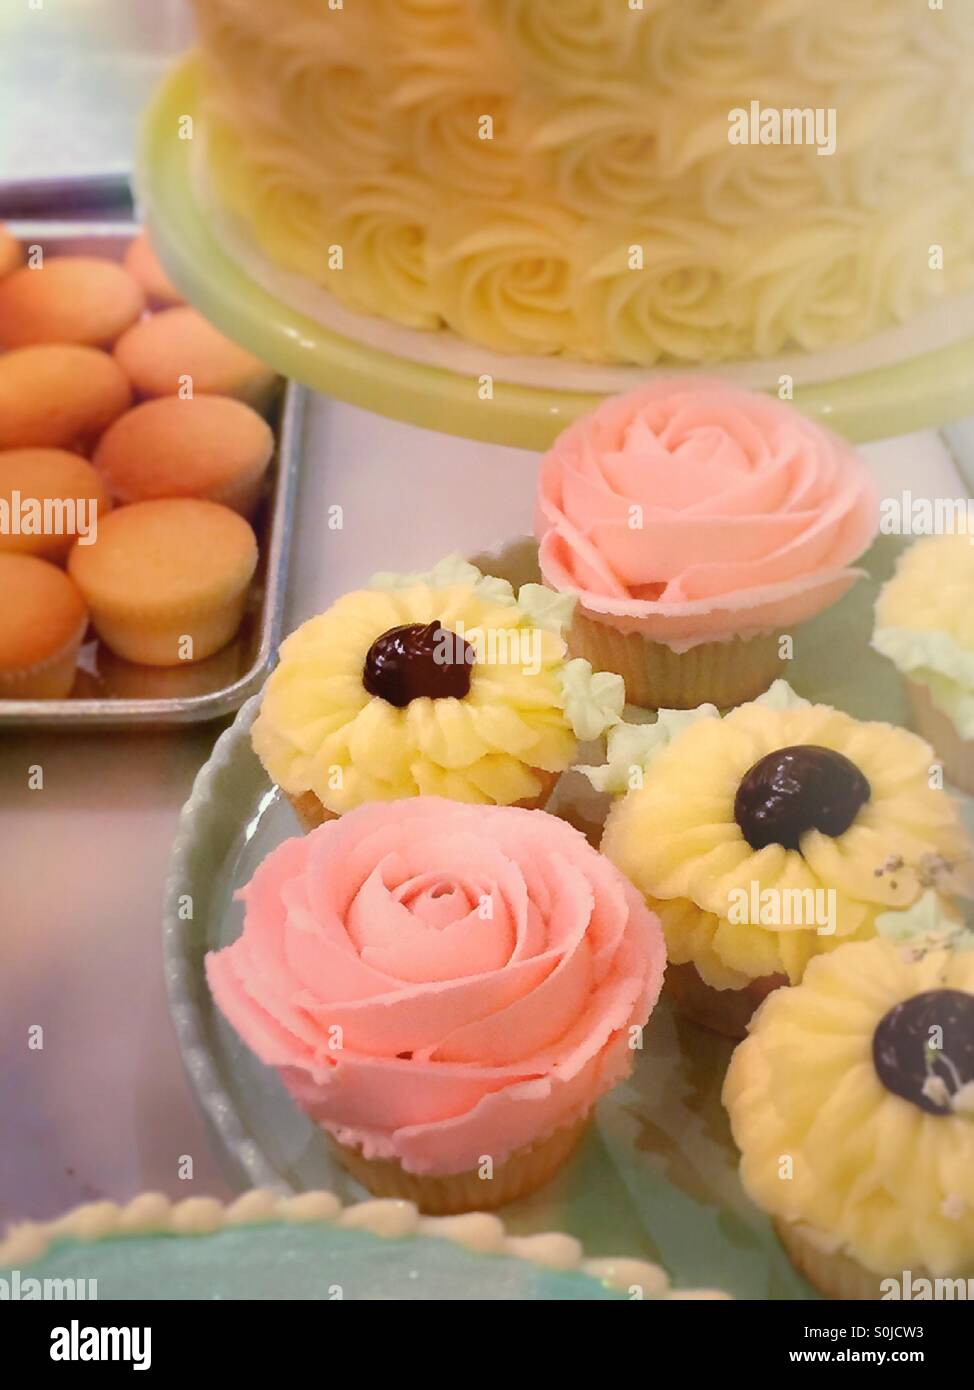 Bakery shop window with cakes and cupcakes. Stock Photo